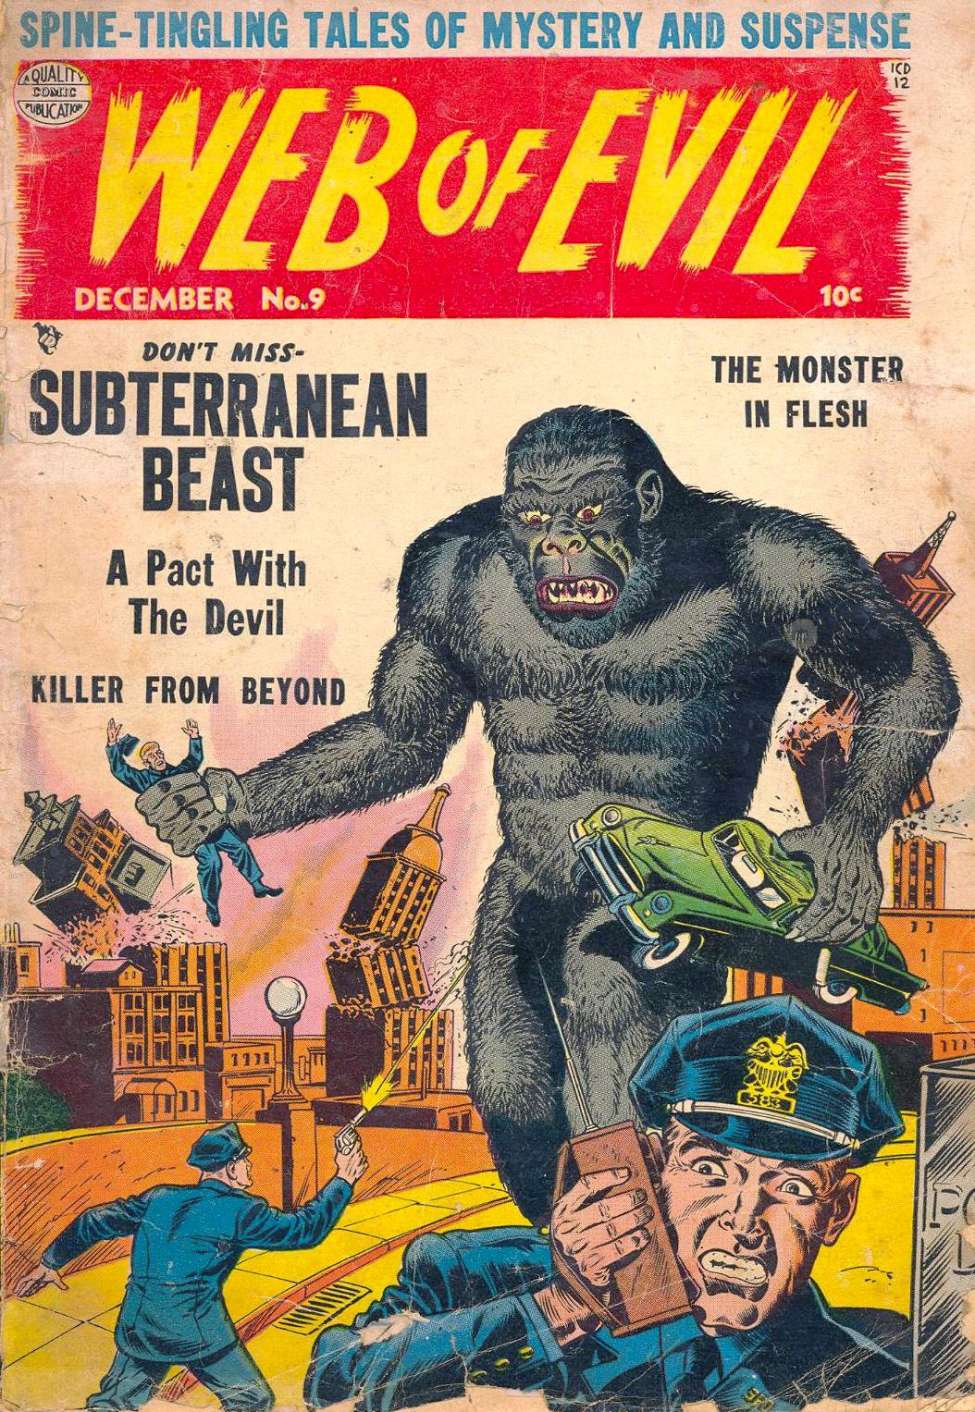 Comic Book Cover For Web of Evil 9